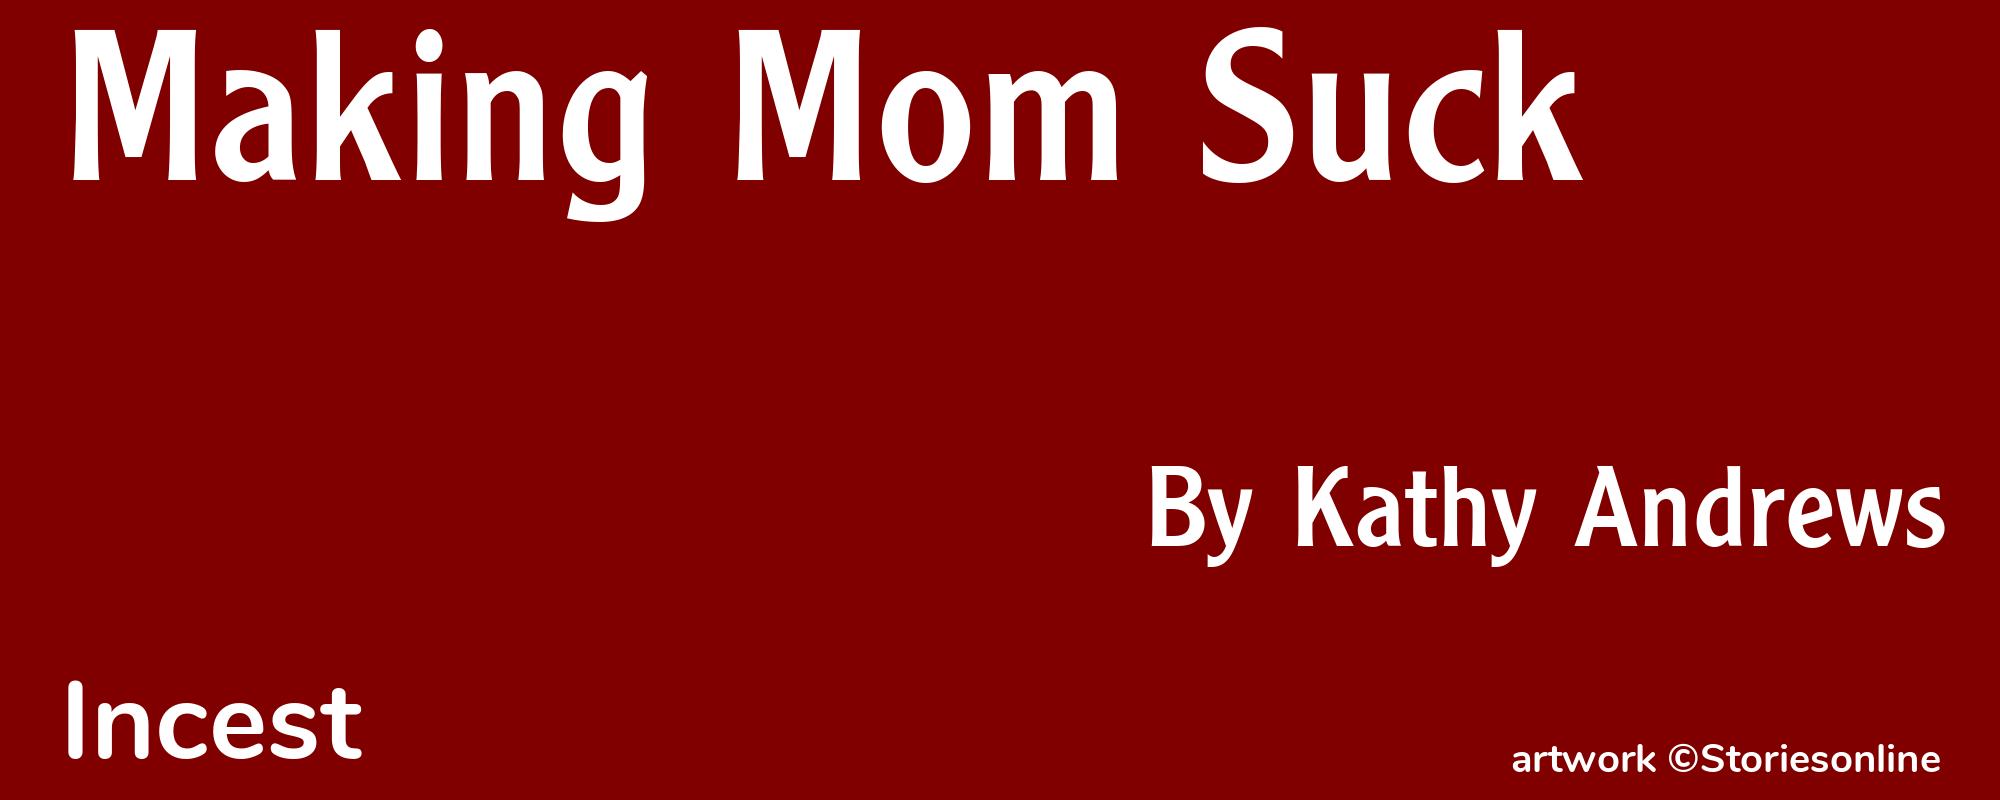 Making Mom Suck - Cover